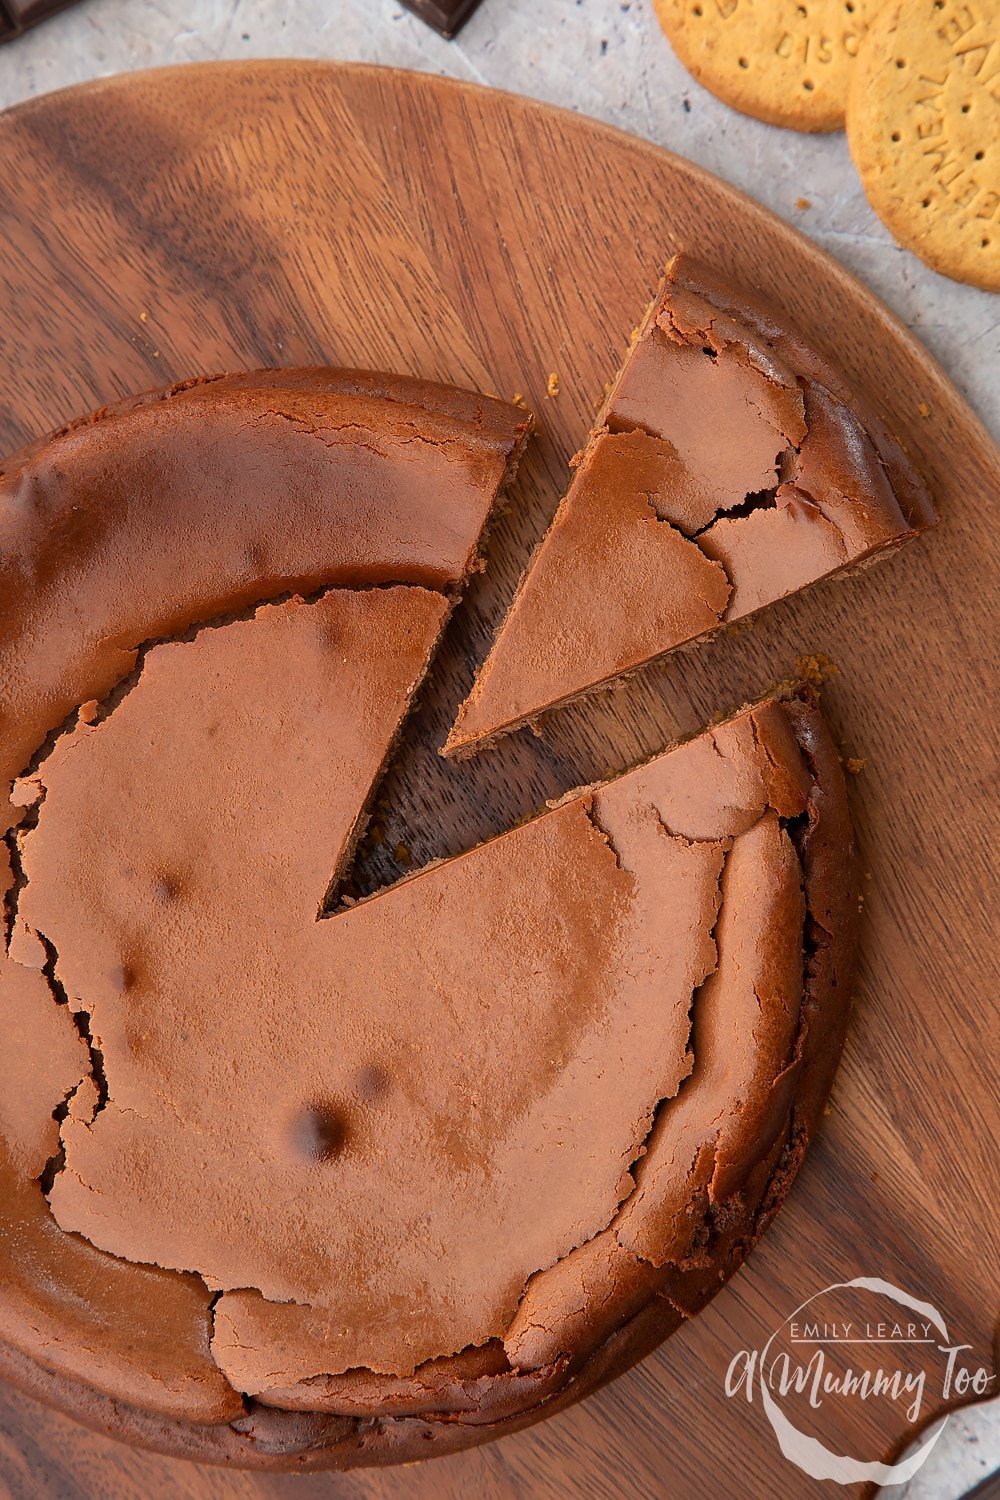 Overhead shot of the baked chocolate cheesecake on a wooden board. One slice of the cheesecake has been cut out.